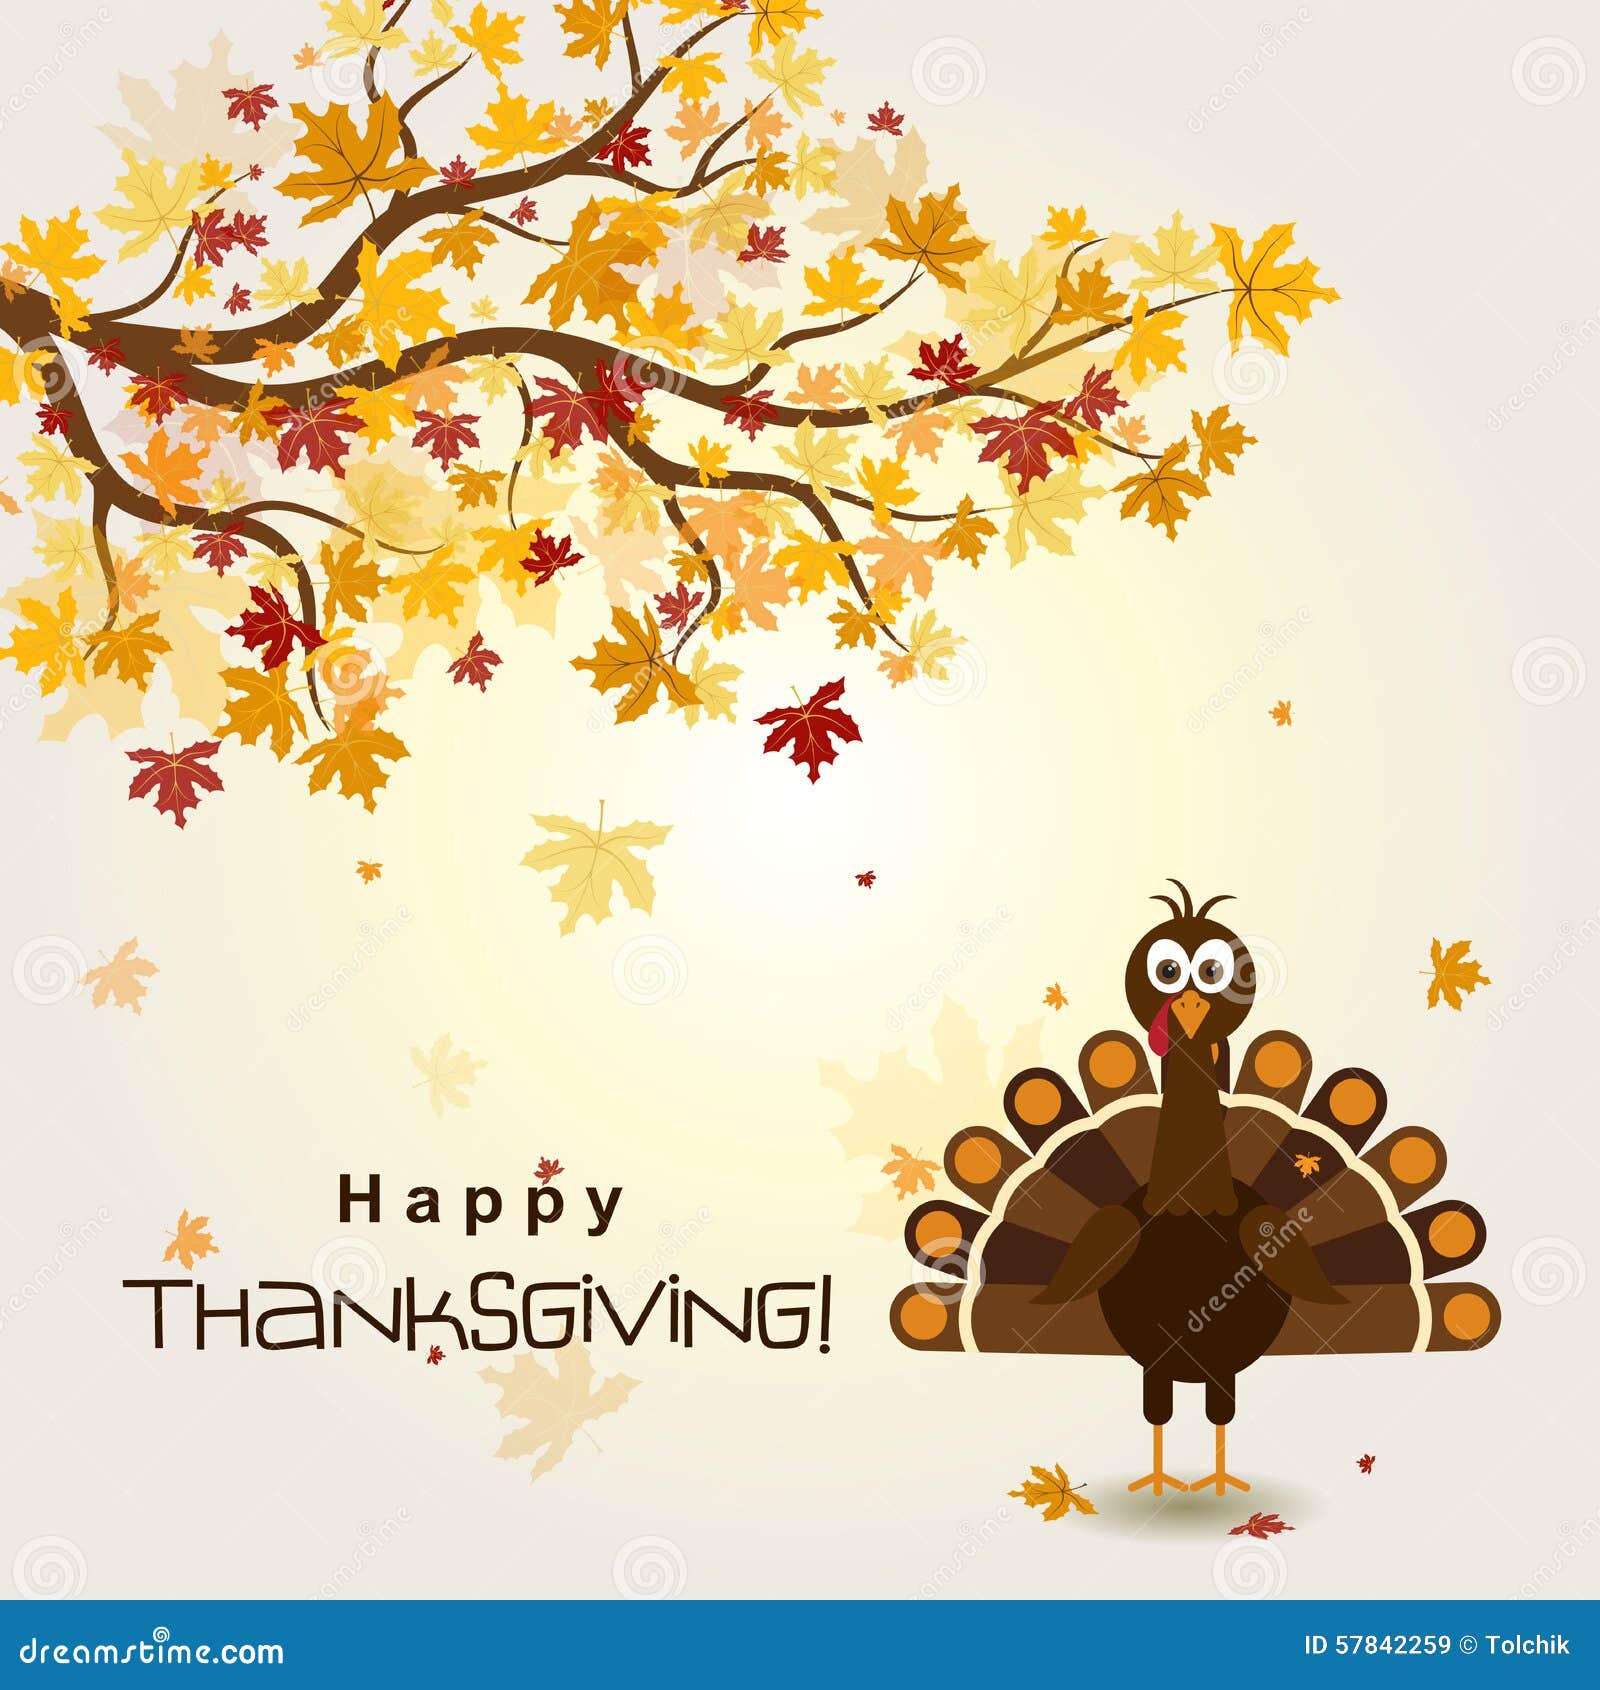 Template Greeting Card With A Happy Thanksgiving Turkey Vector Stock Vector Illustration Of Leaf Celebration 57842259